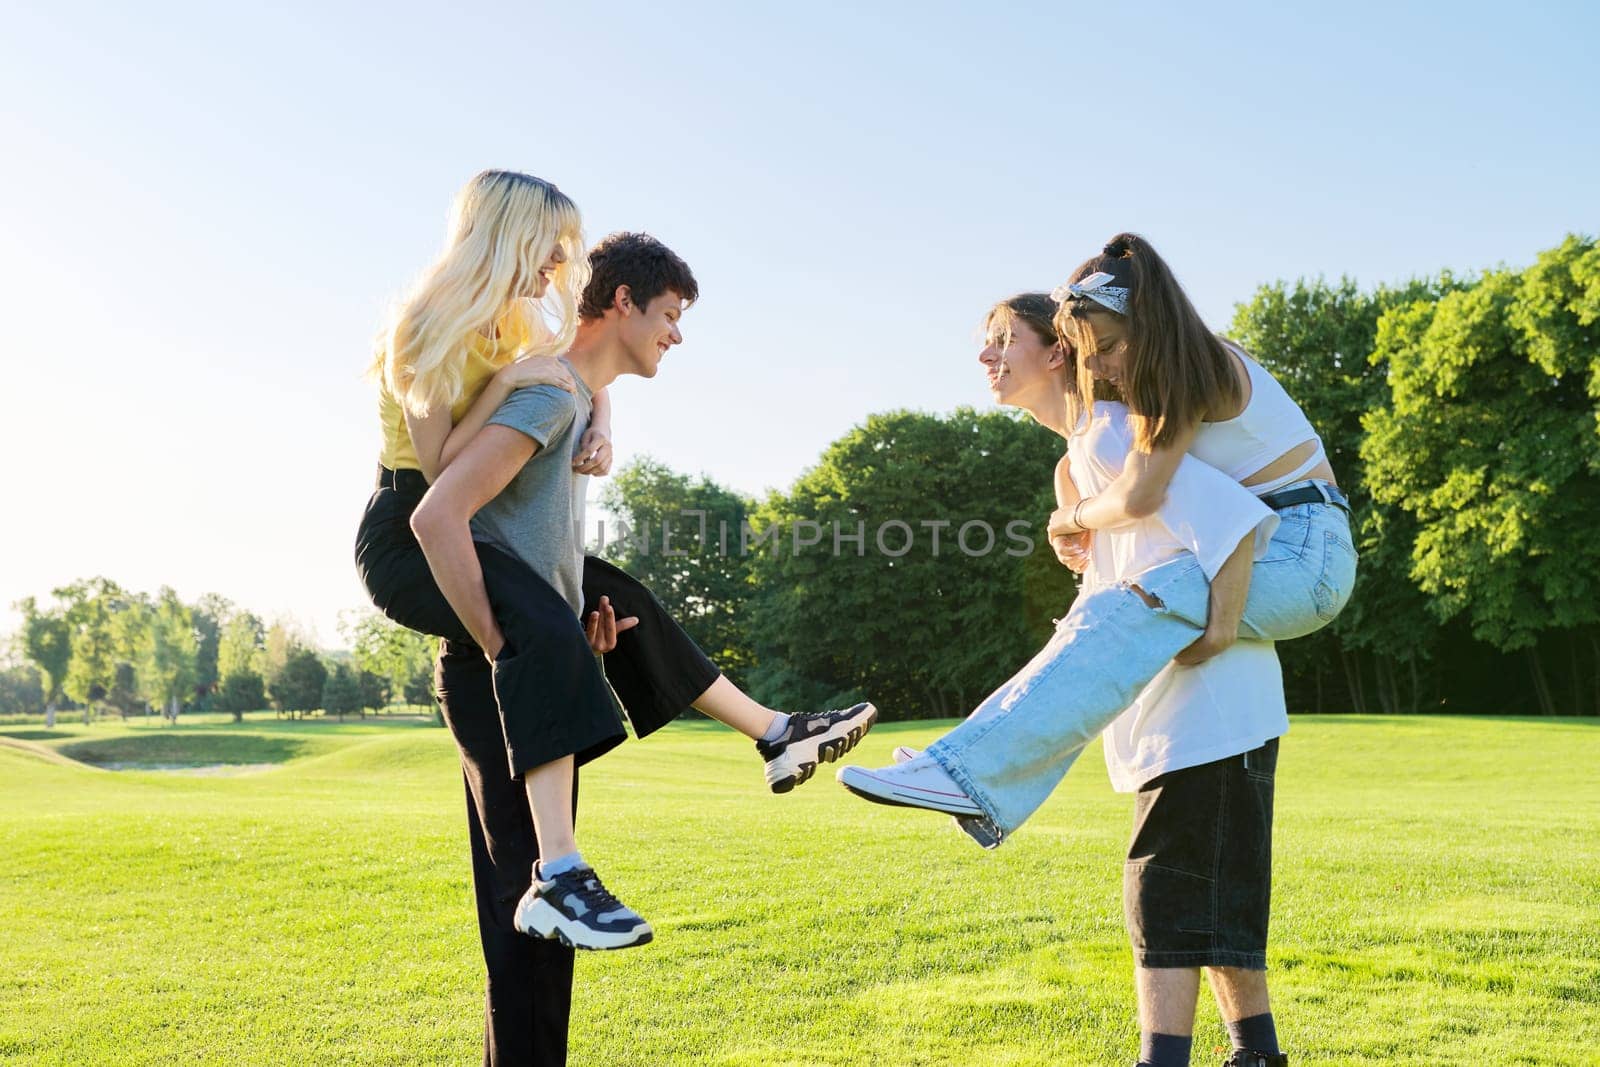 Teenage youth having fun in the park, happy laughing friends. Group of teenagers together on sunny day. Friendship, adolescence, summer, vacation, lifestyle, fun, happiness, holiday, leisure, people